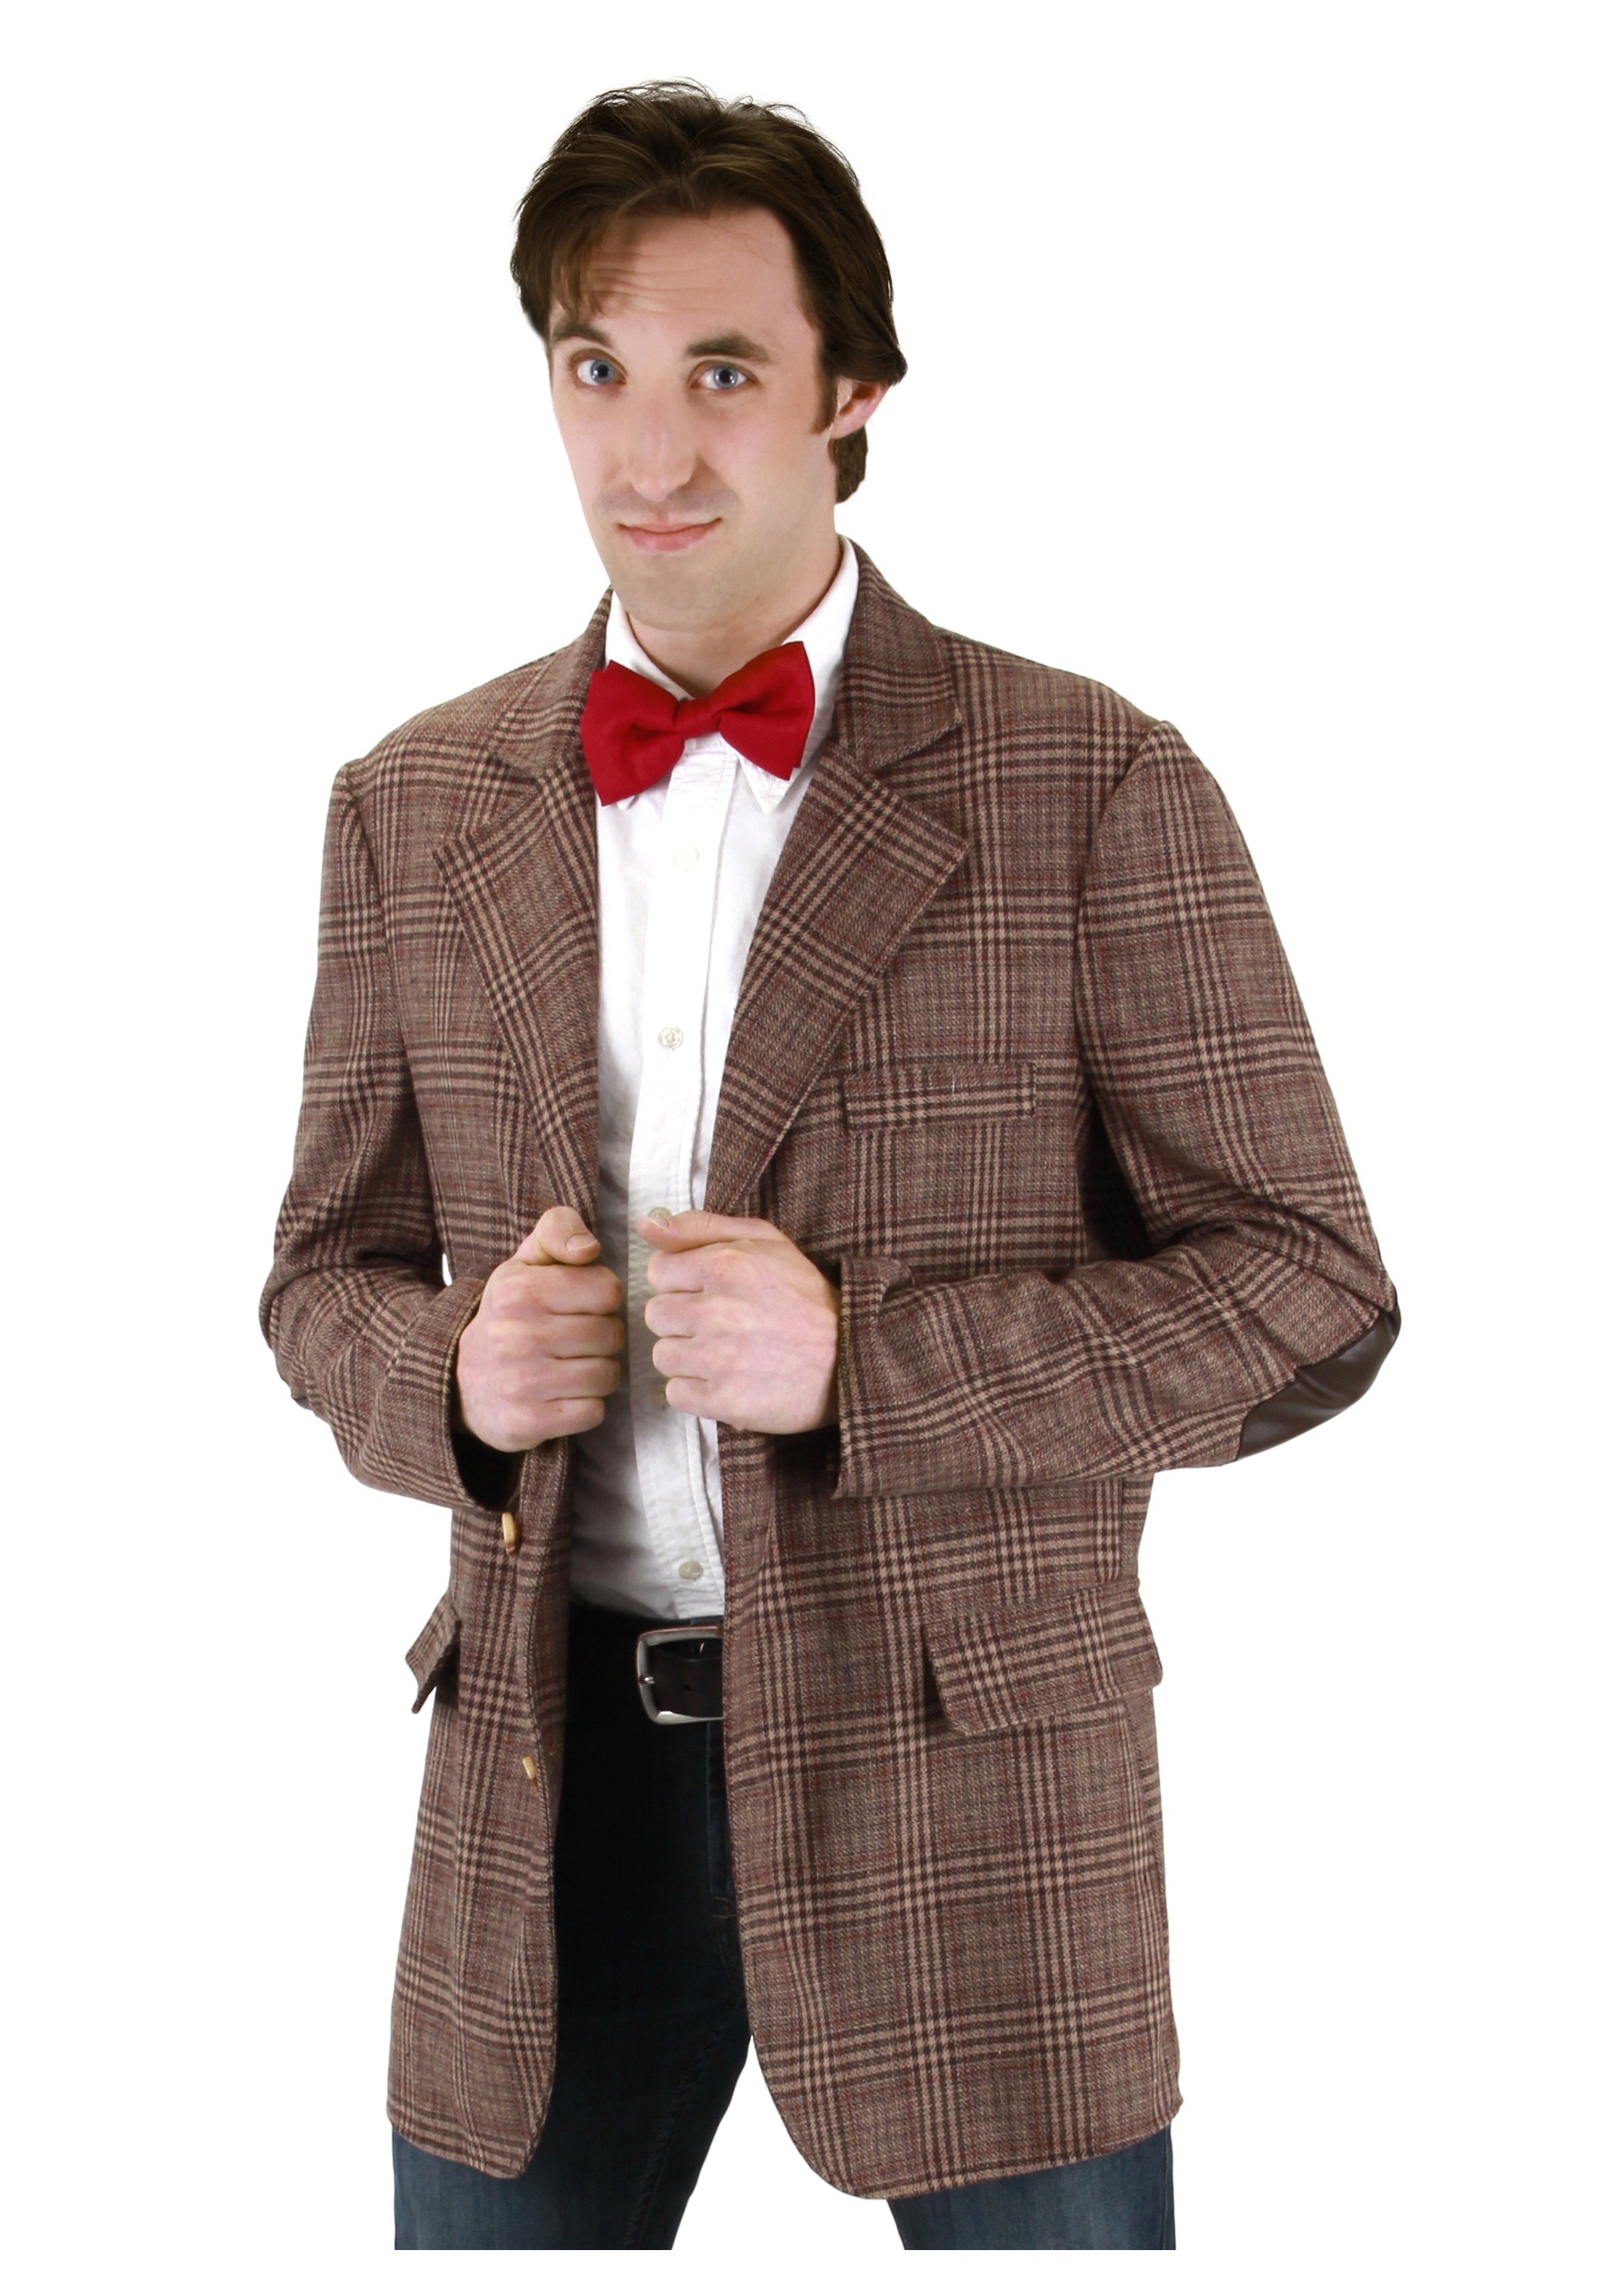 11th doctor cosplay